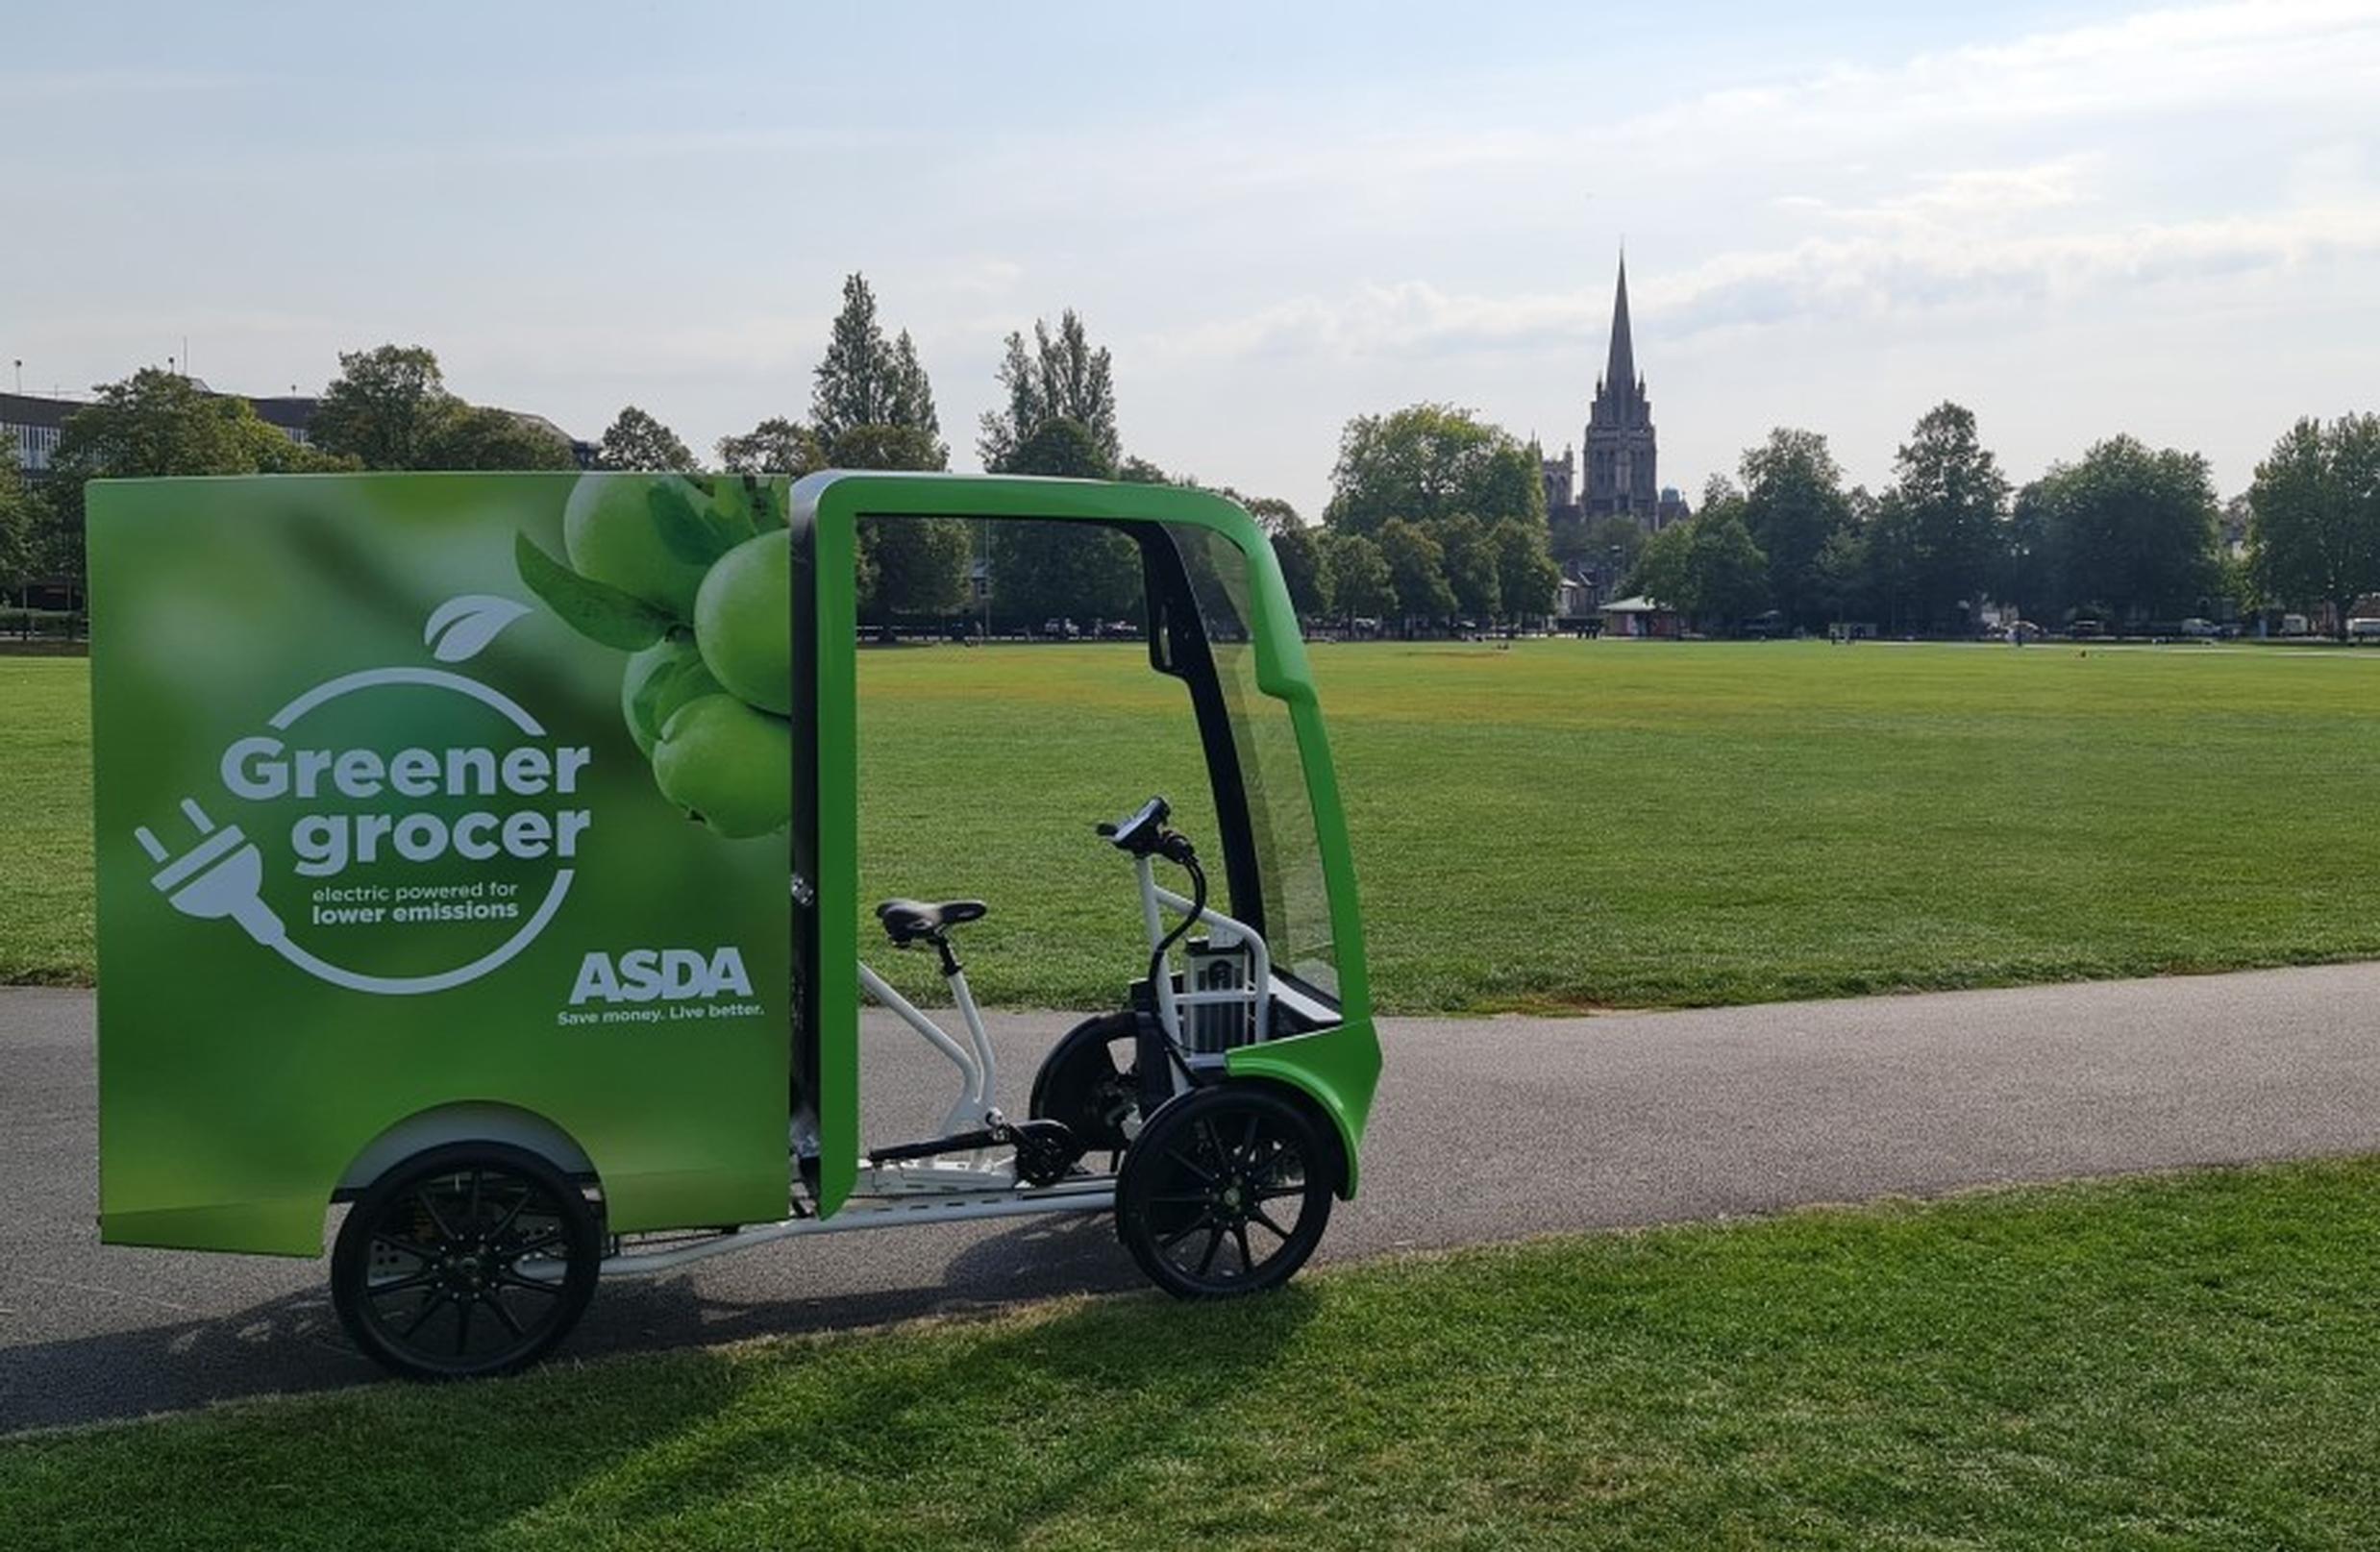 In October 2020, Oxfordshire-based EAV and Asda announced a two-week trial of the EAV four-wheel ecargo bike